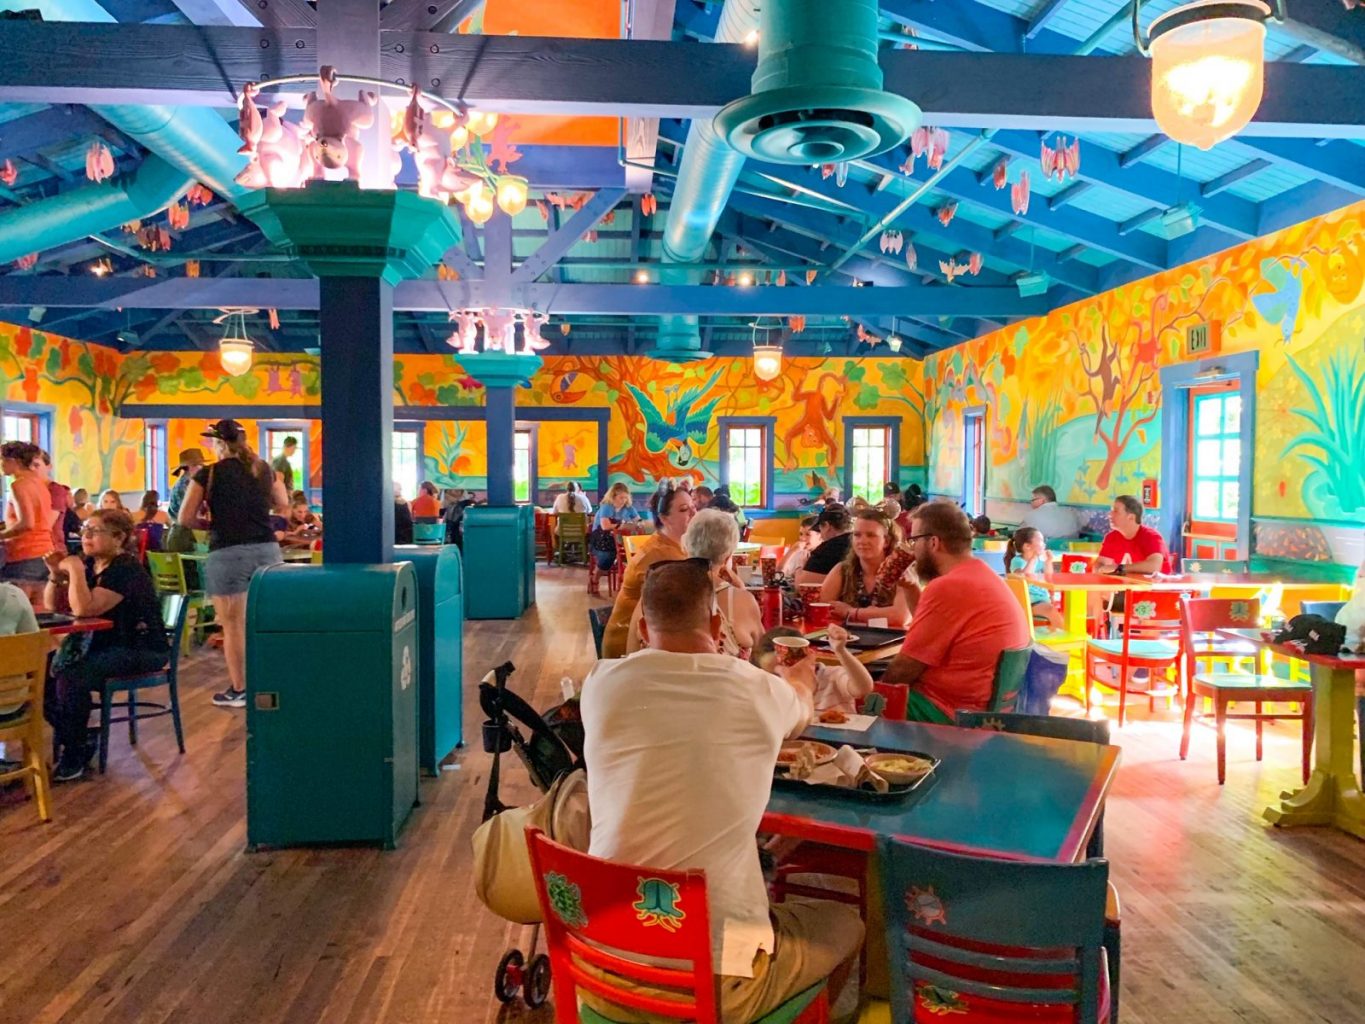 animal kingdom breakfast inside of Pizzafari with colorful decor and bright painted walls